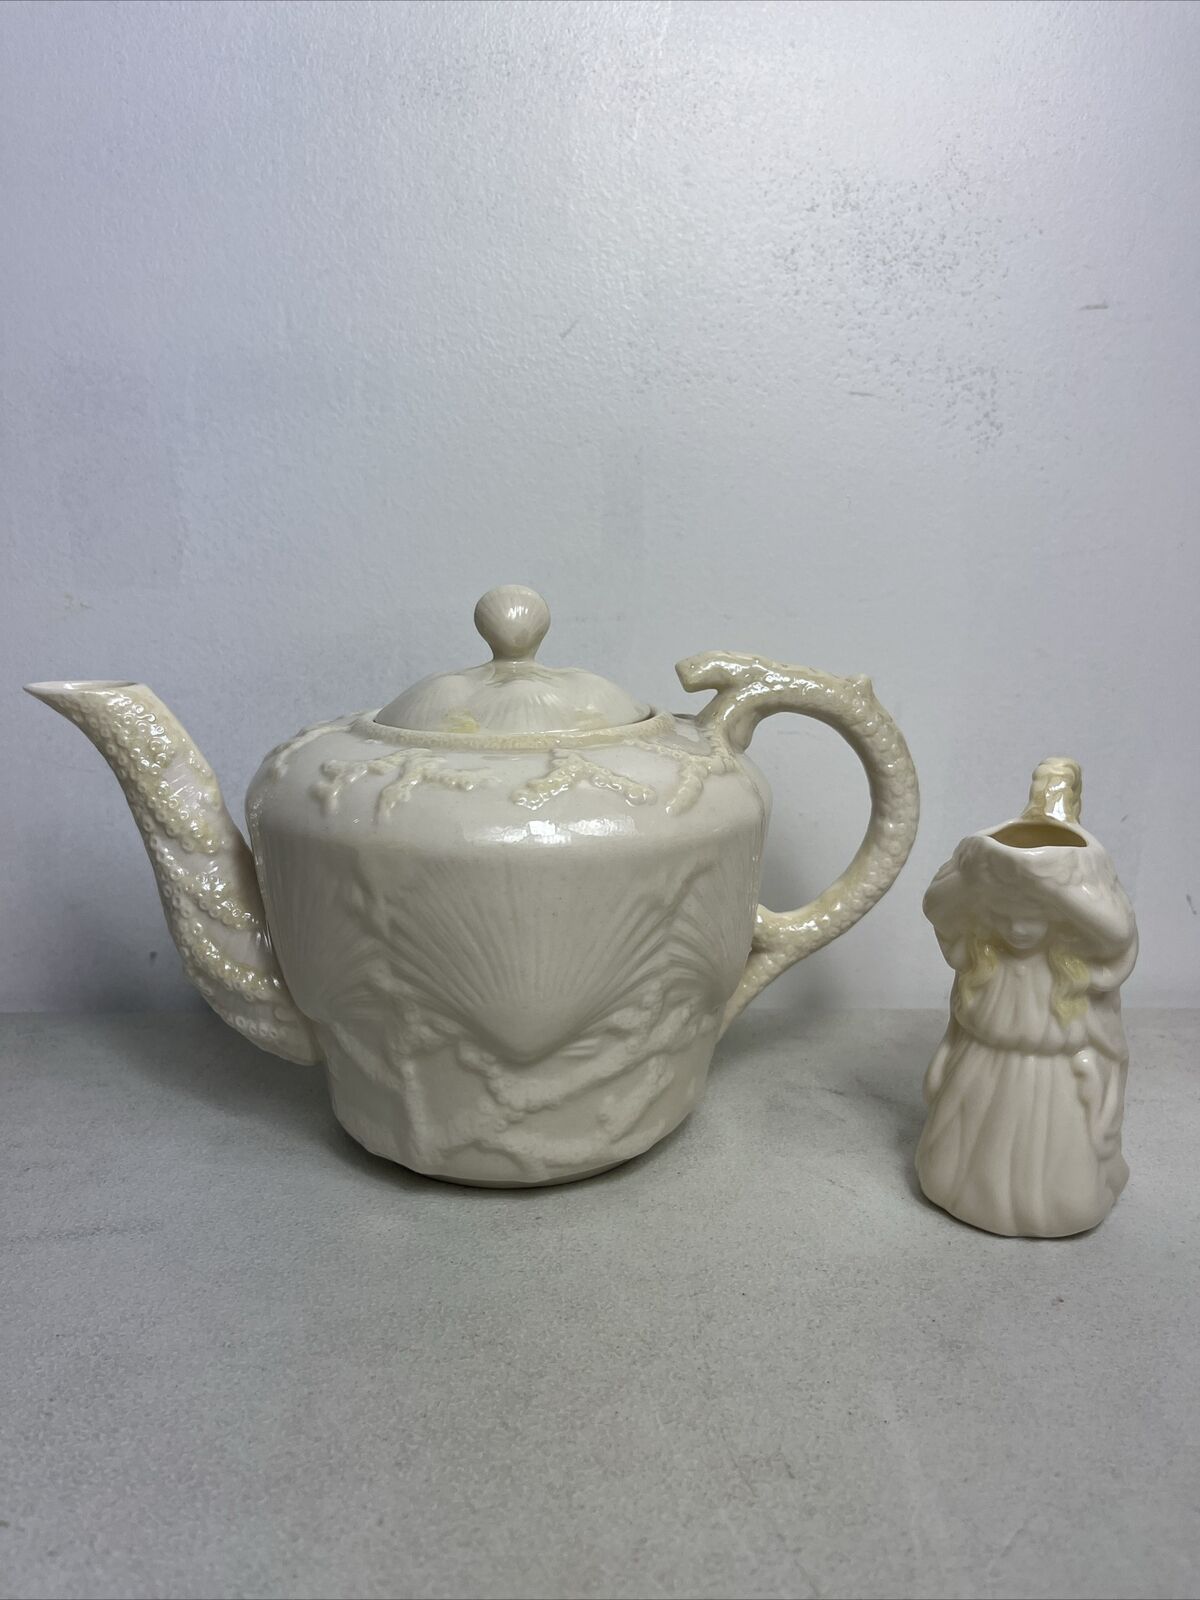 Vintage 1946 to 1955 Belleek Pottery Shell Teapot & Small Pitcher Ireland Marked